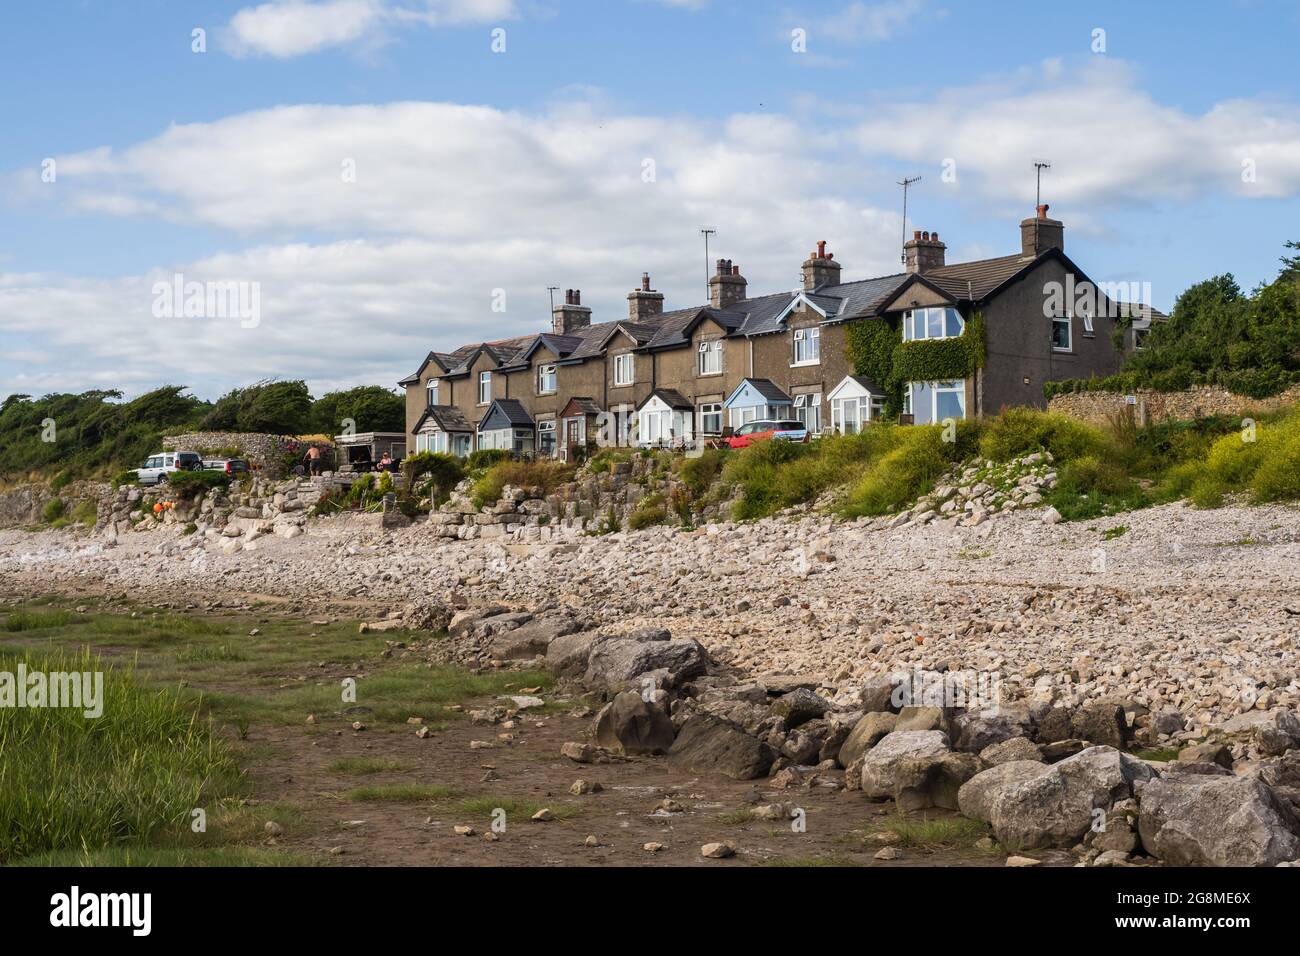 16.07.21 Silverdale, Lancashire, UK A row of cottages on Shore Rd next to the beach on the Lancashire Coastal Way walk Stock Photo